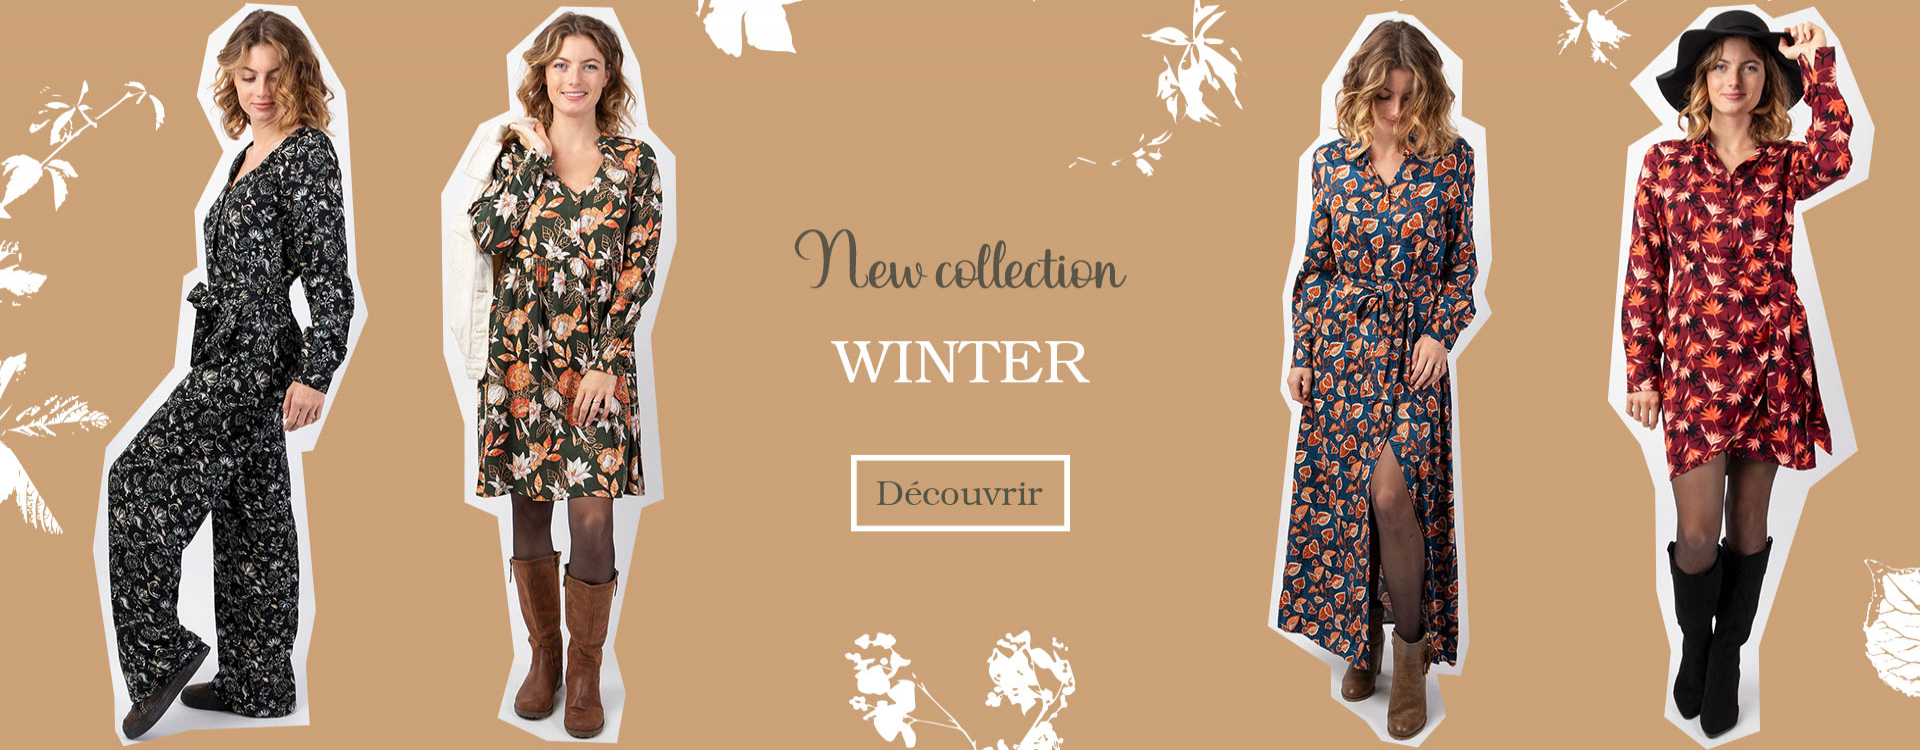 New Collection winter